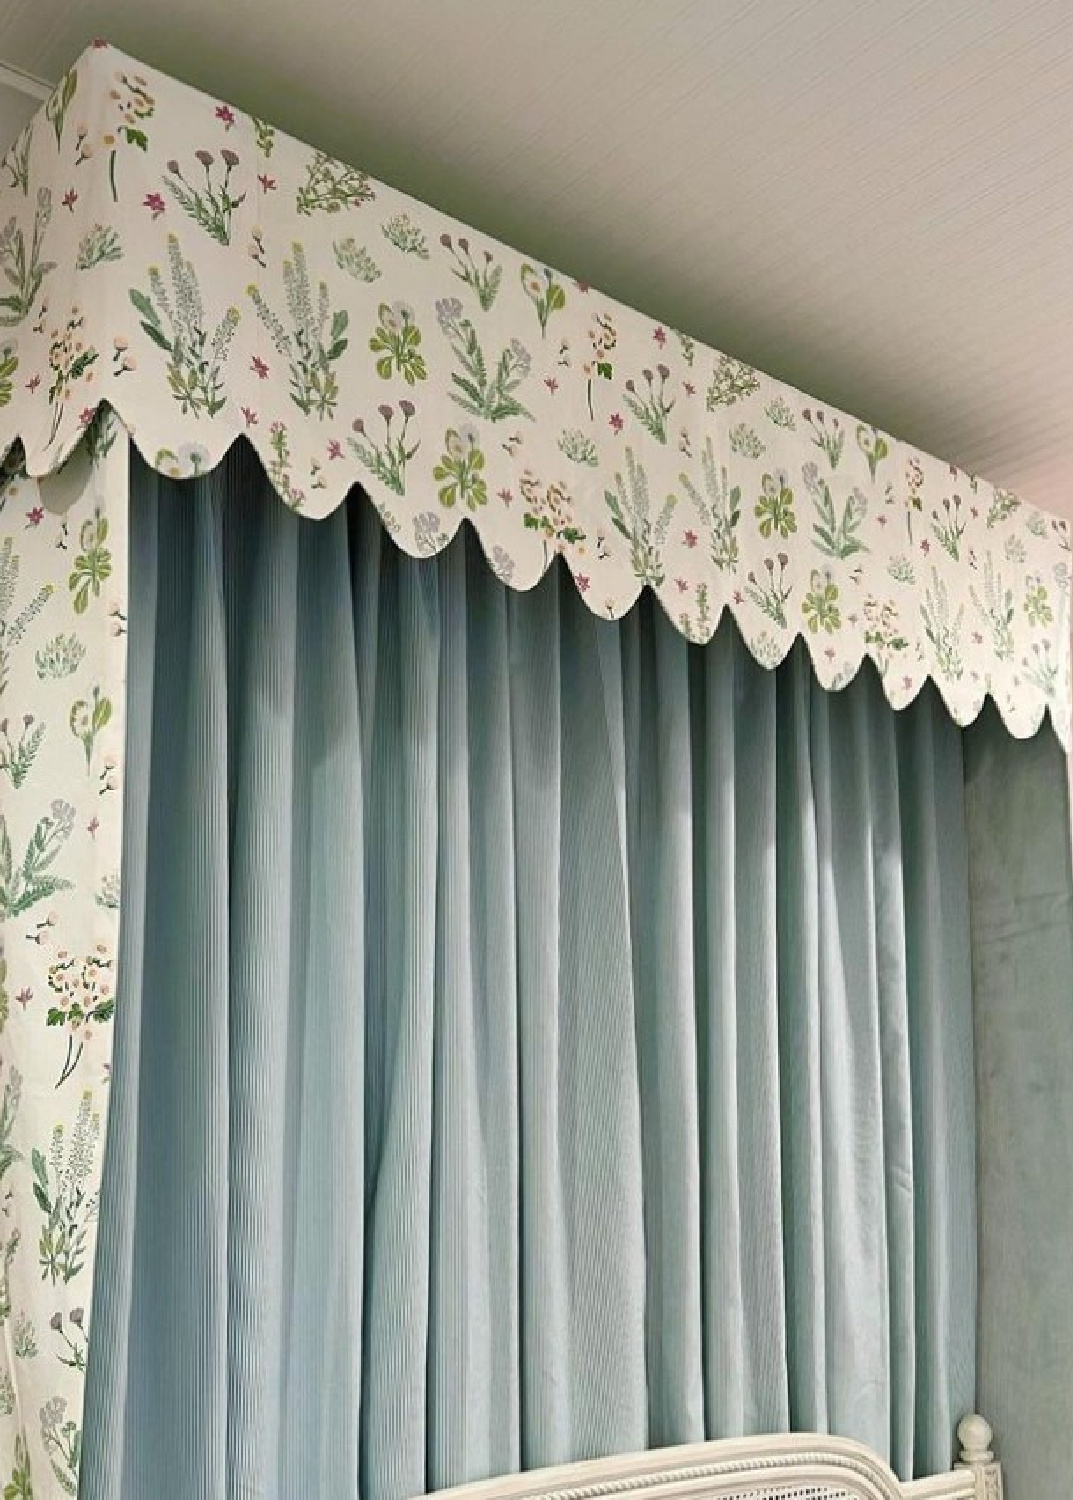 Scalloped valance in a bedroom by M. E. Beck Design.